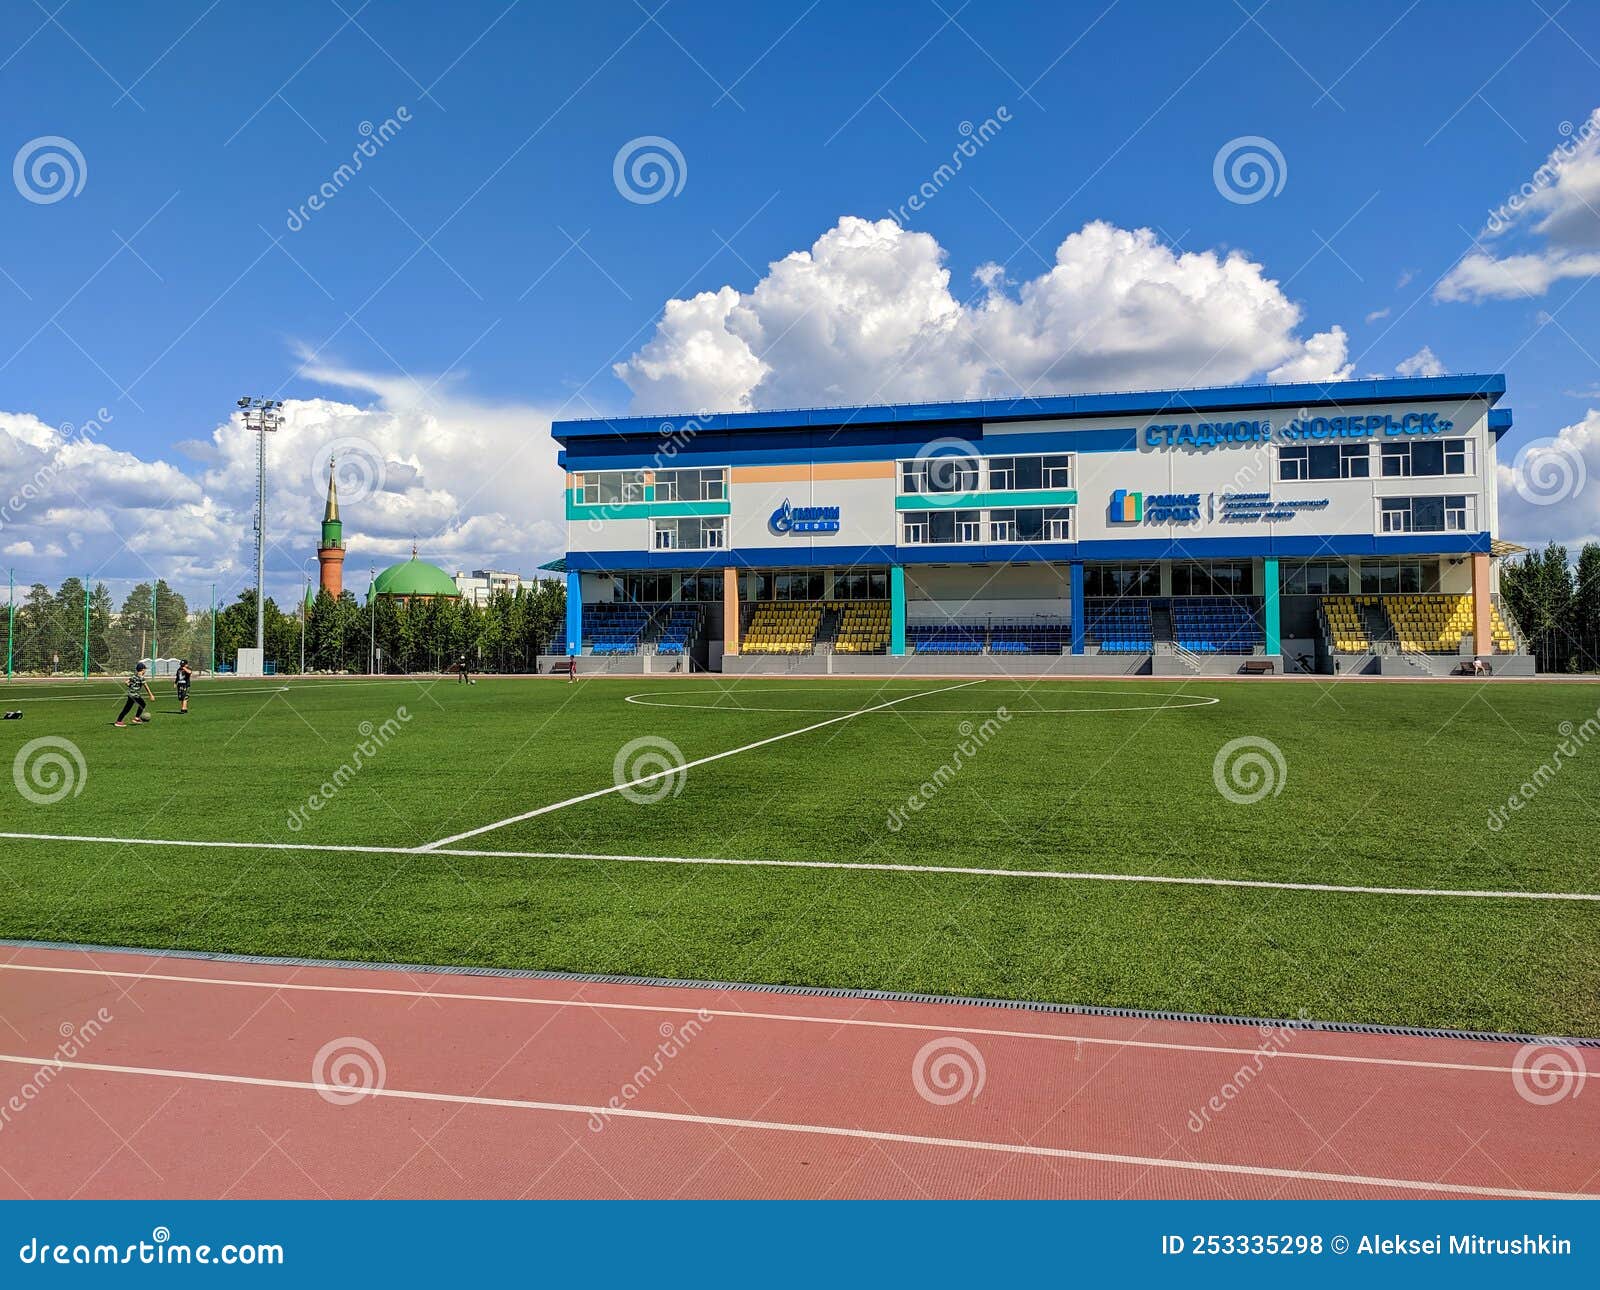 Noyabrsk, Russia - July 17 2022: View of the Noyabrsk Sports Stadium